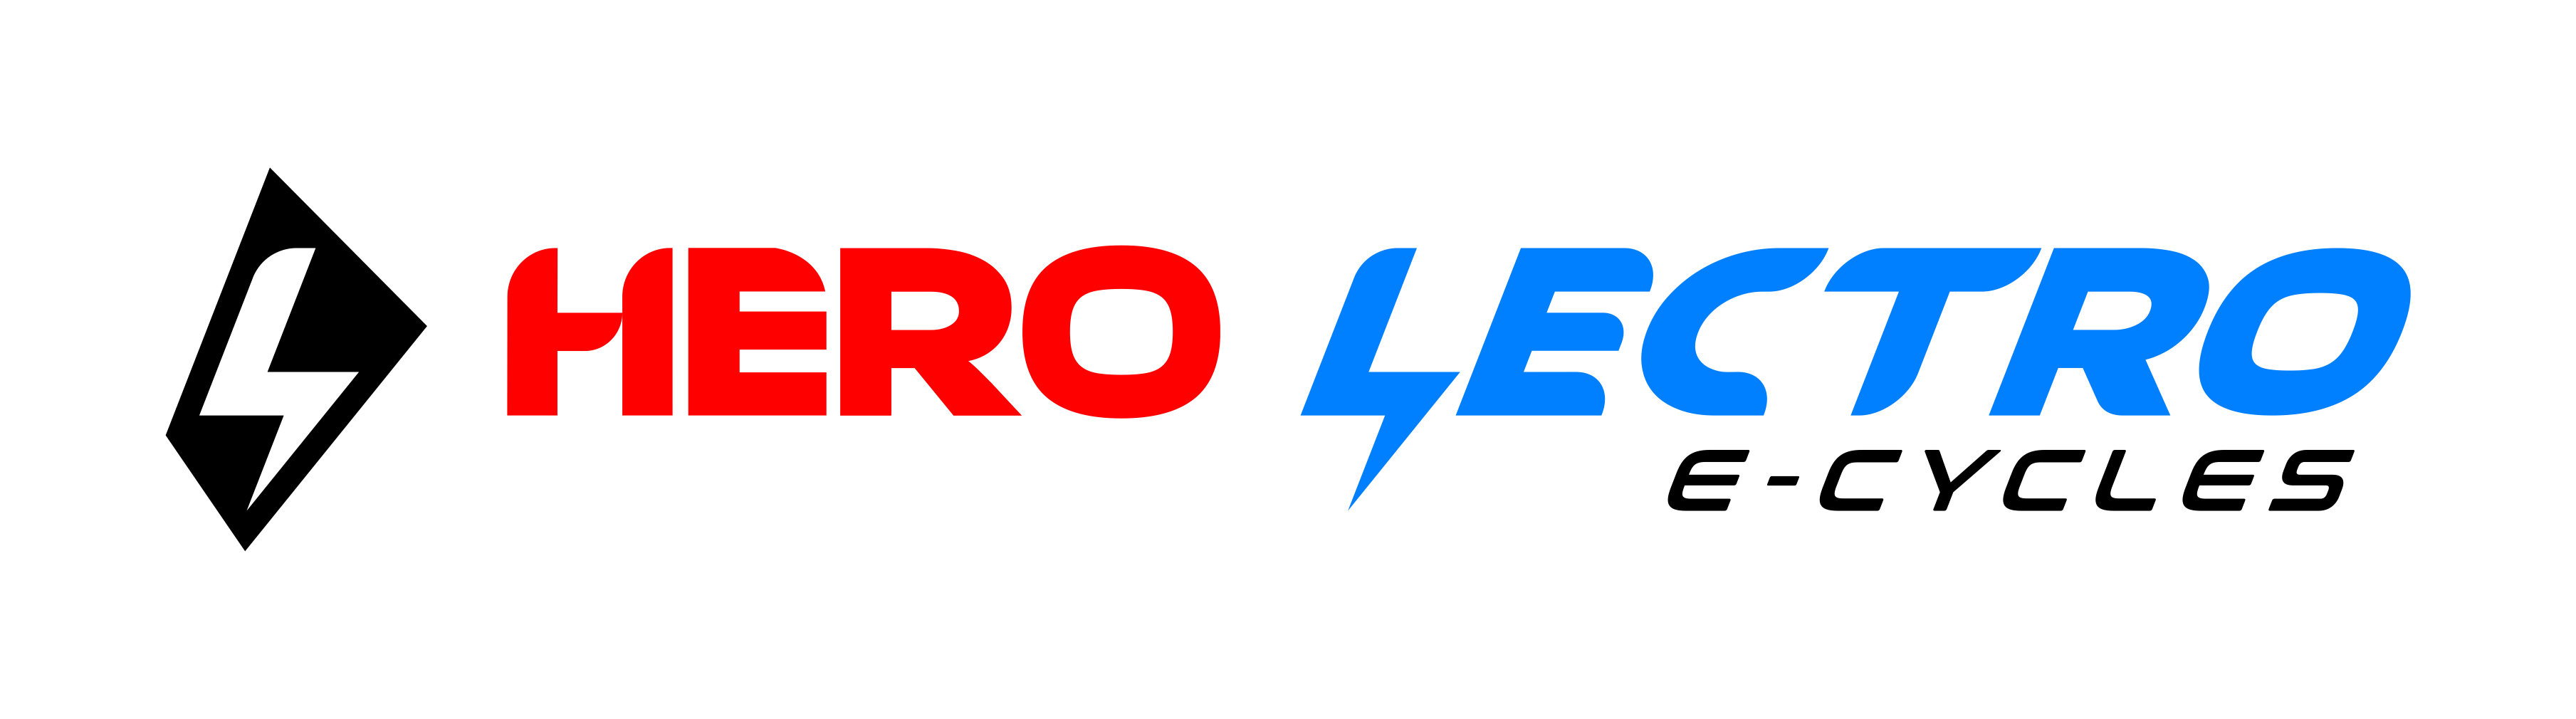 Hero Lectro Launches F6i, a New Game Changing Smart E-cycle for India’s Passionate Young Cyclists decoding=